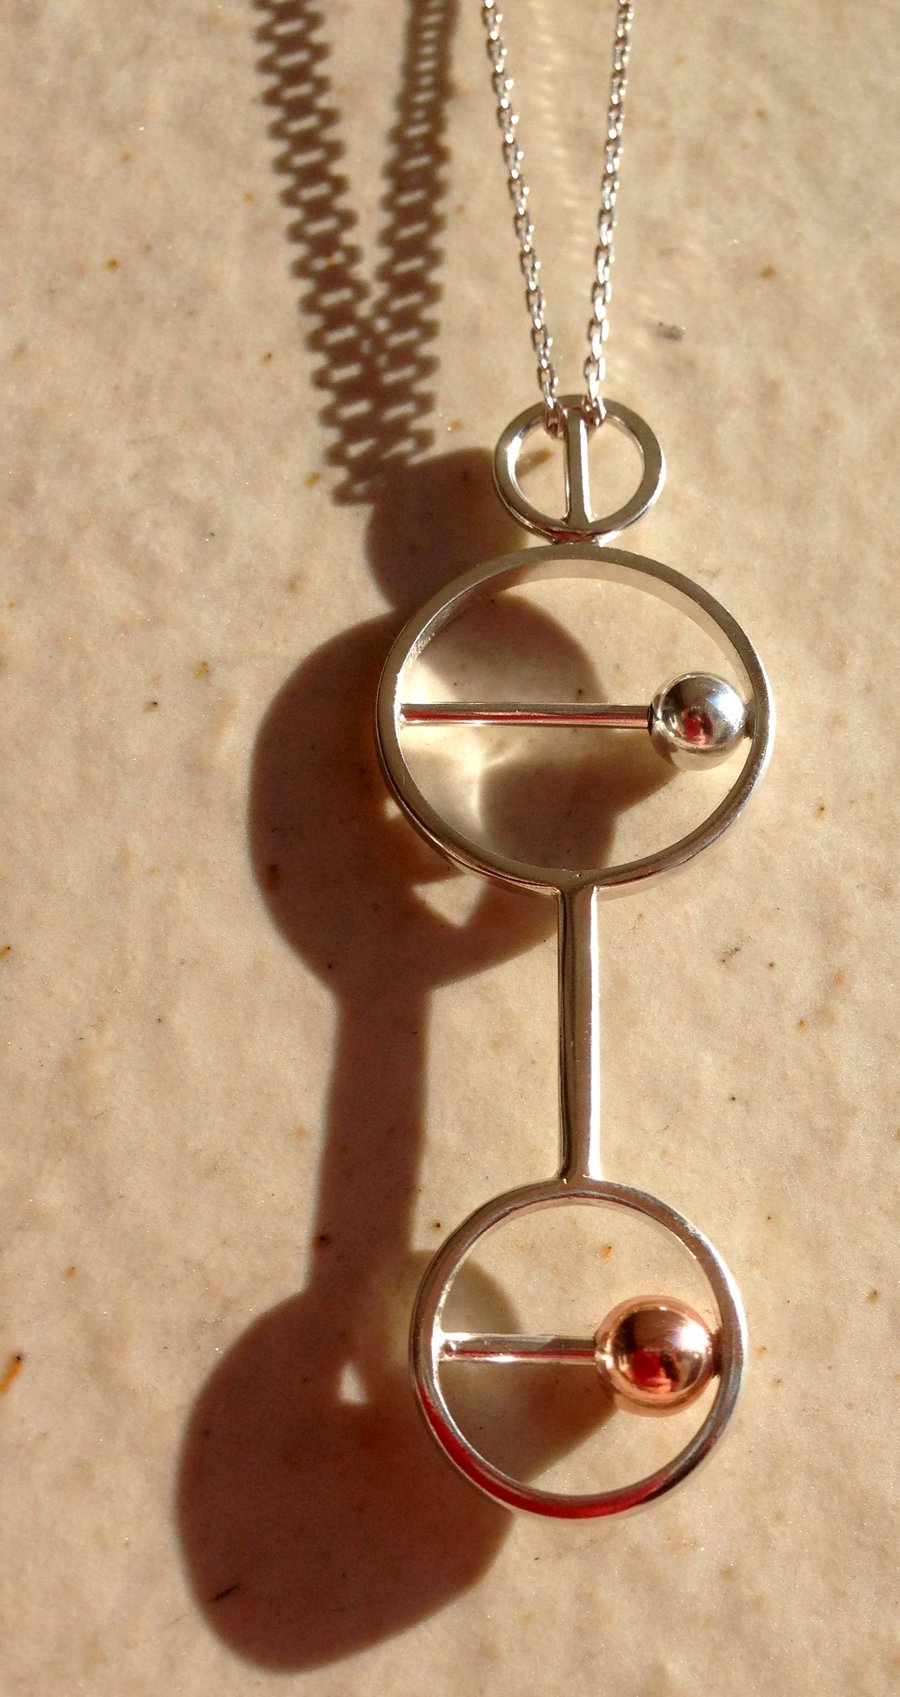 A statement kinetic pendant in Sterling silver with silver and copper beads